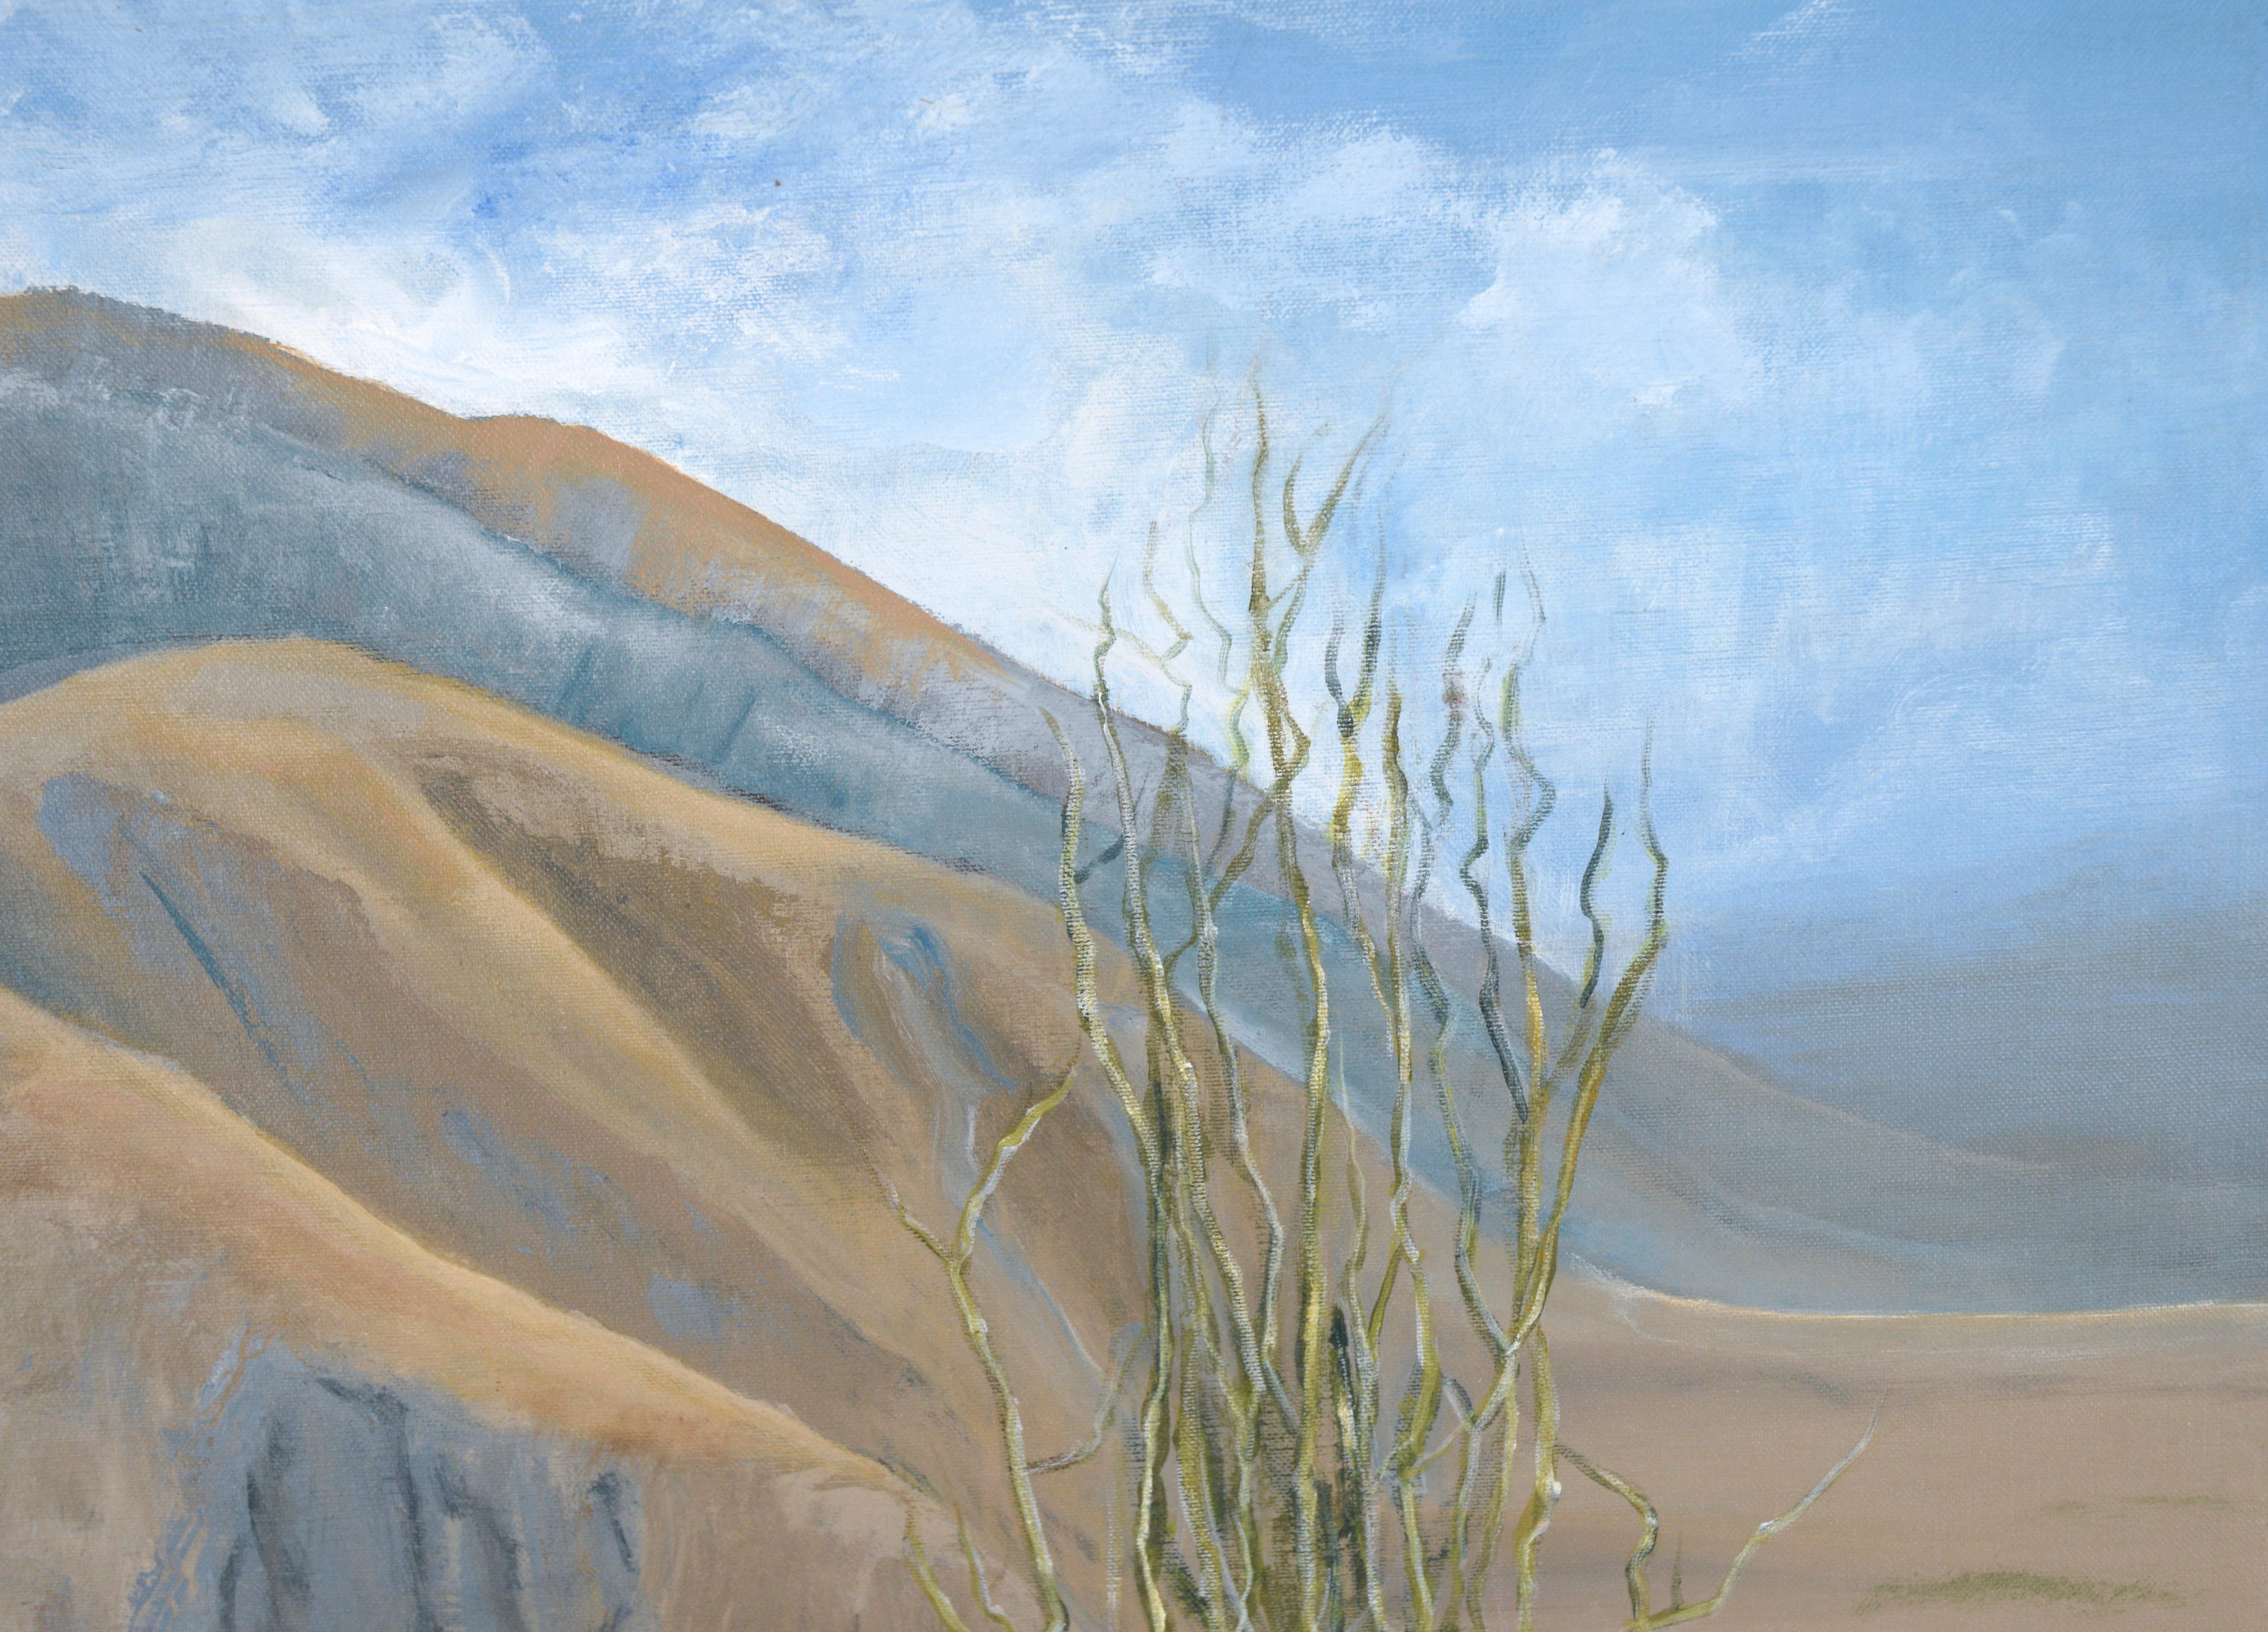 Desert Foothills Under a Blue Sky - Landscape in Acrylic on Canvas - American Impressionist Painting by Eth Bunton